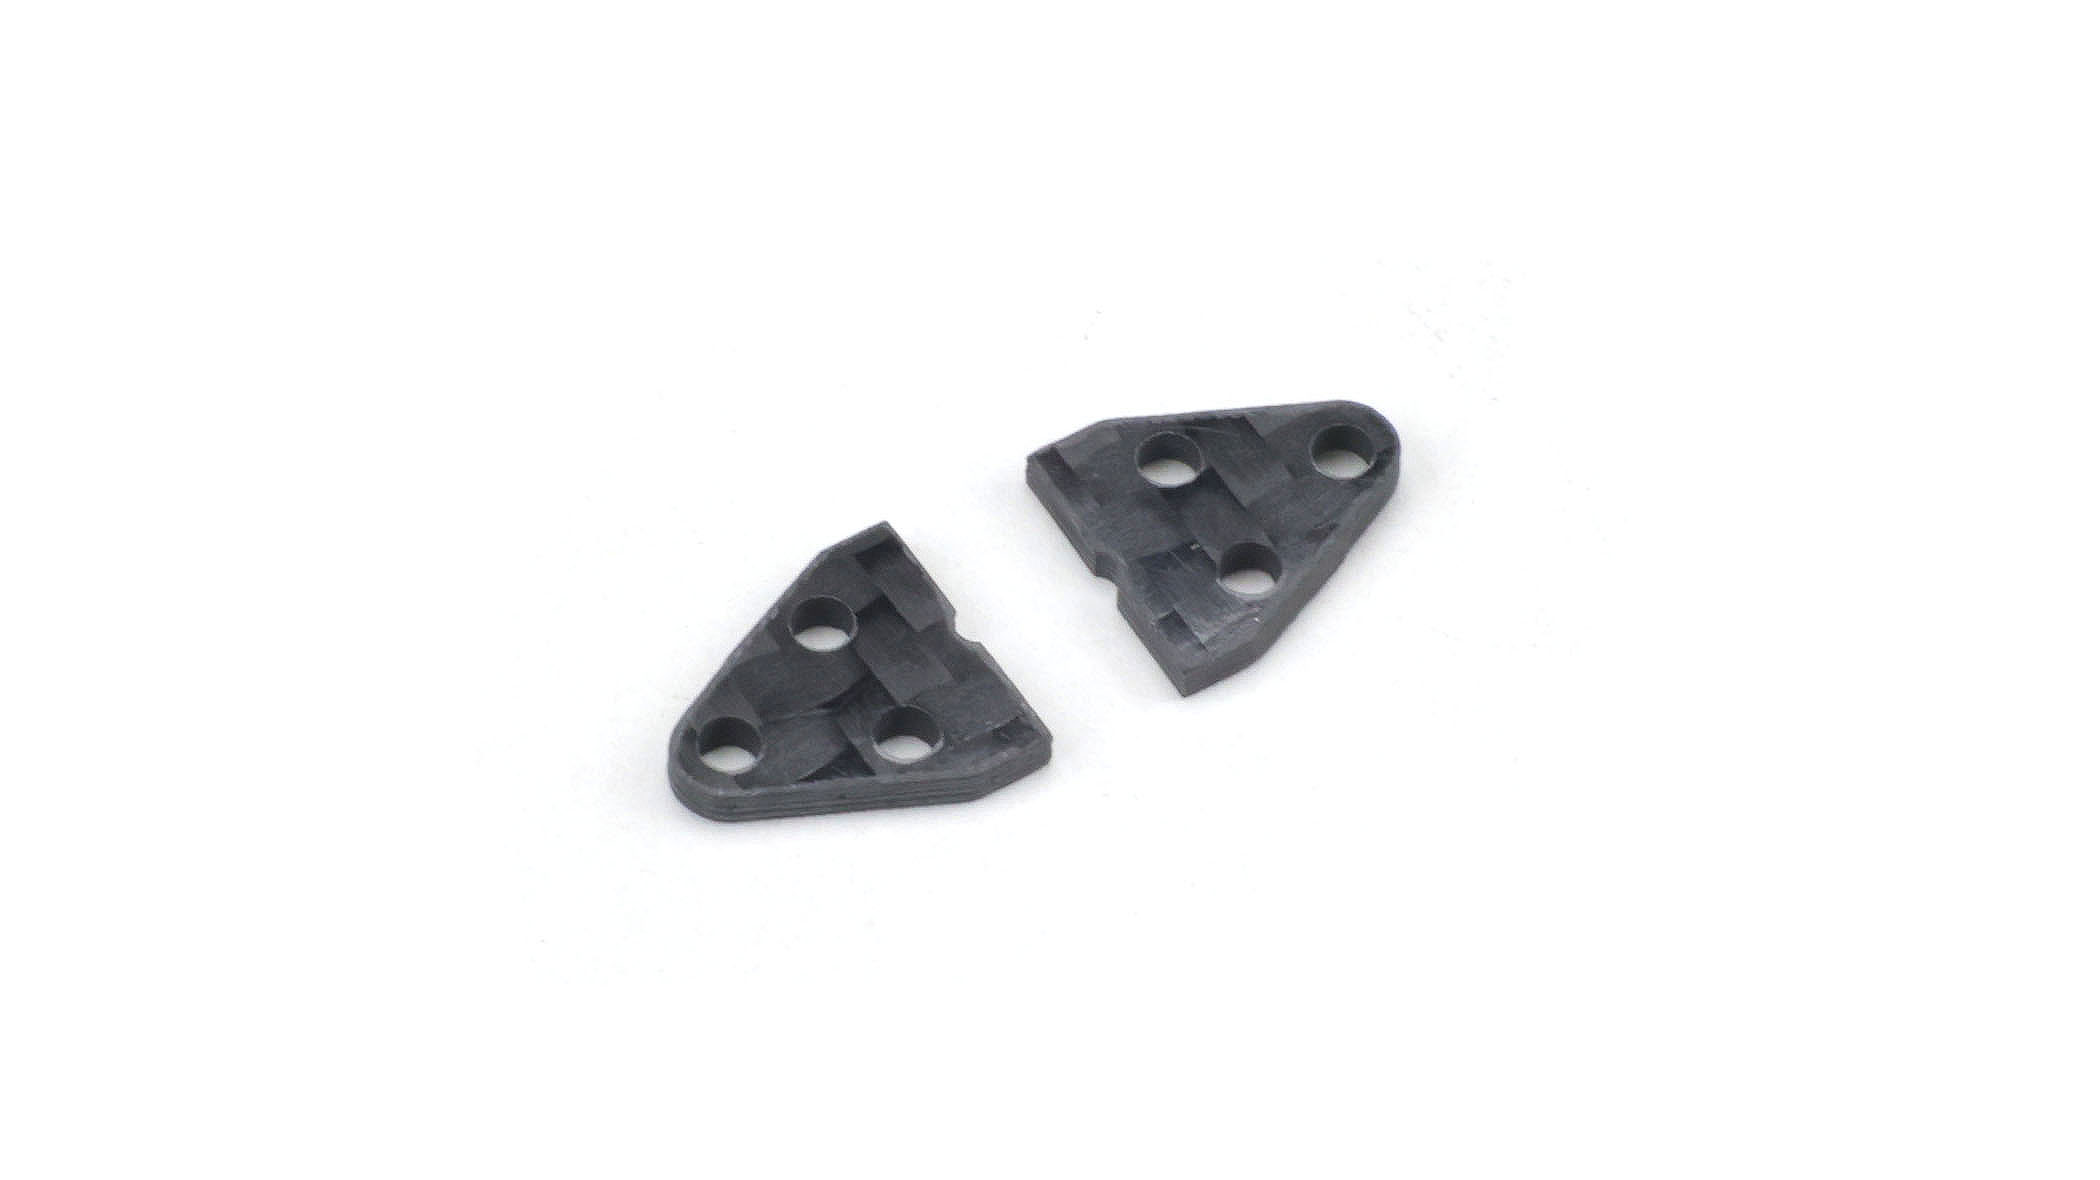 Niemas Racecars NP007 - Special Carbon Fiber Spacers for BR-Chassis - Fronts 0.58mm - PAIR